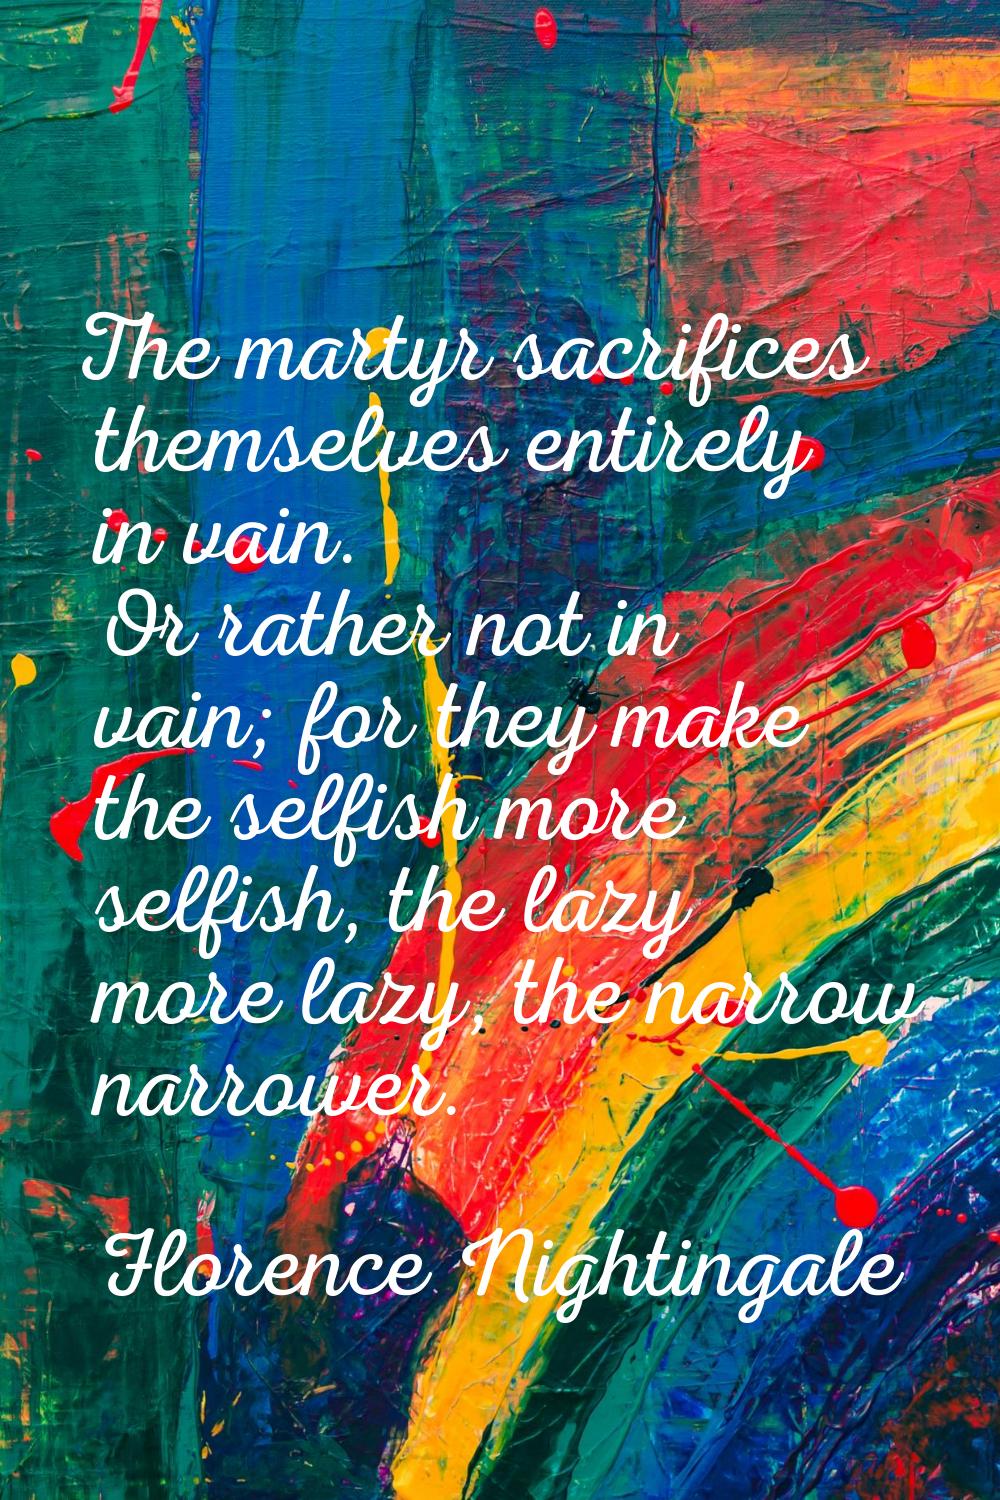 The martyr sacrifices themselves entirely in vain. Or rather not in vain; for they make the selfish